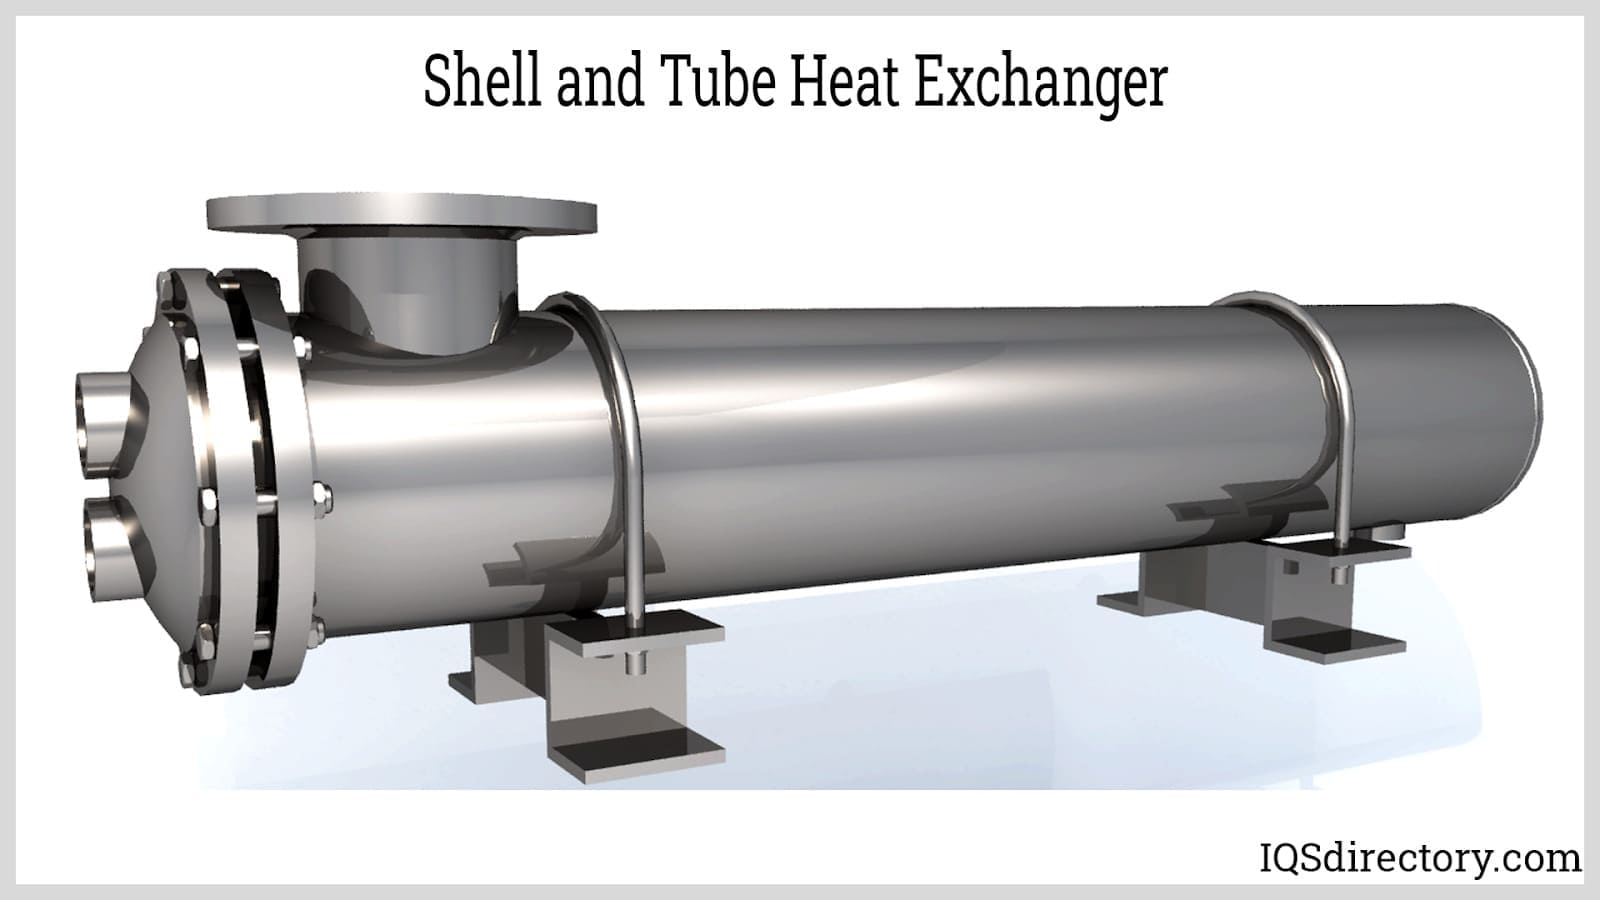 Shell and Tube Heat Exchanger: What Is It? Types, Process